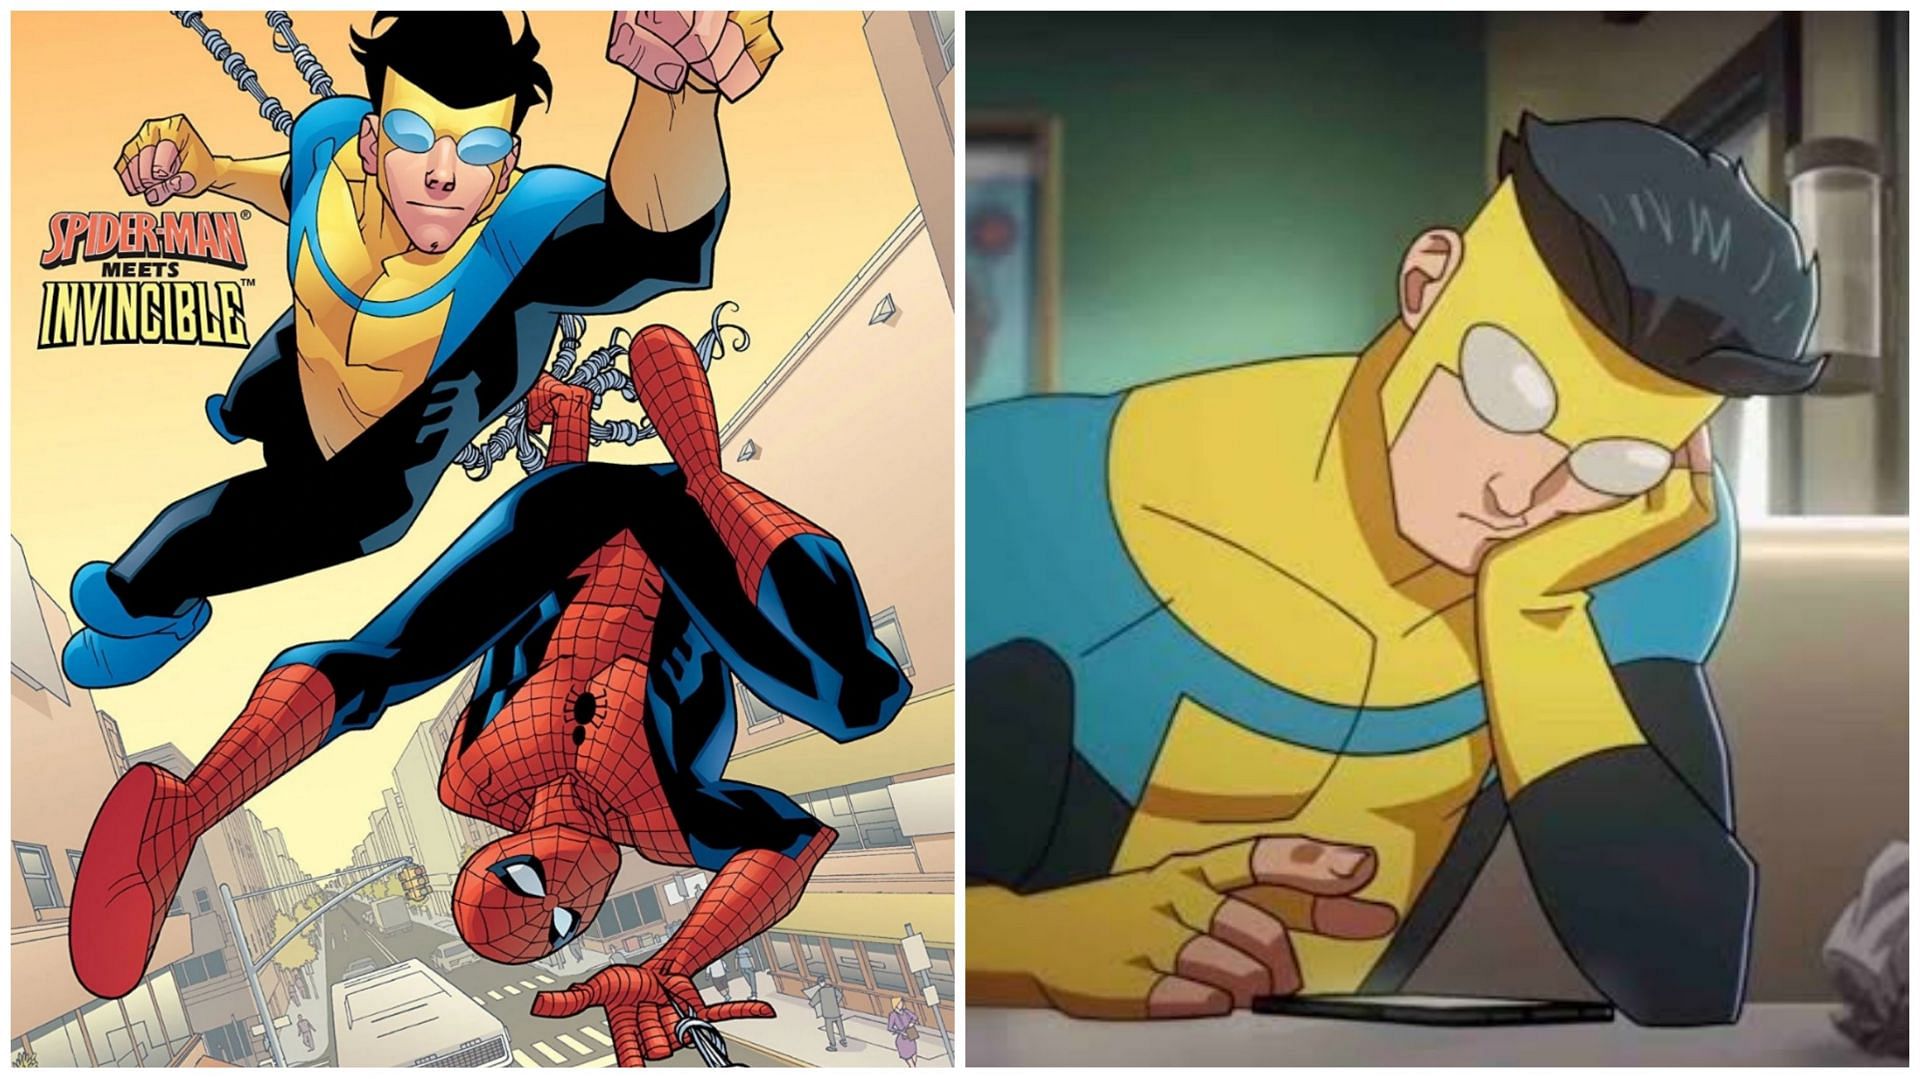 Marvel Team-Up #14 cover and a still from Invincible Season 2 (Images via Marvel Comics and Amazon Prime Video)